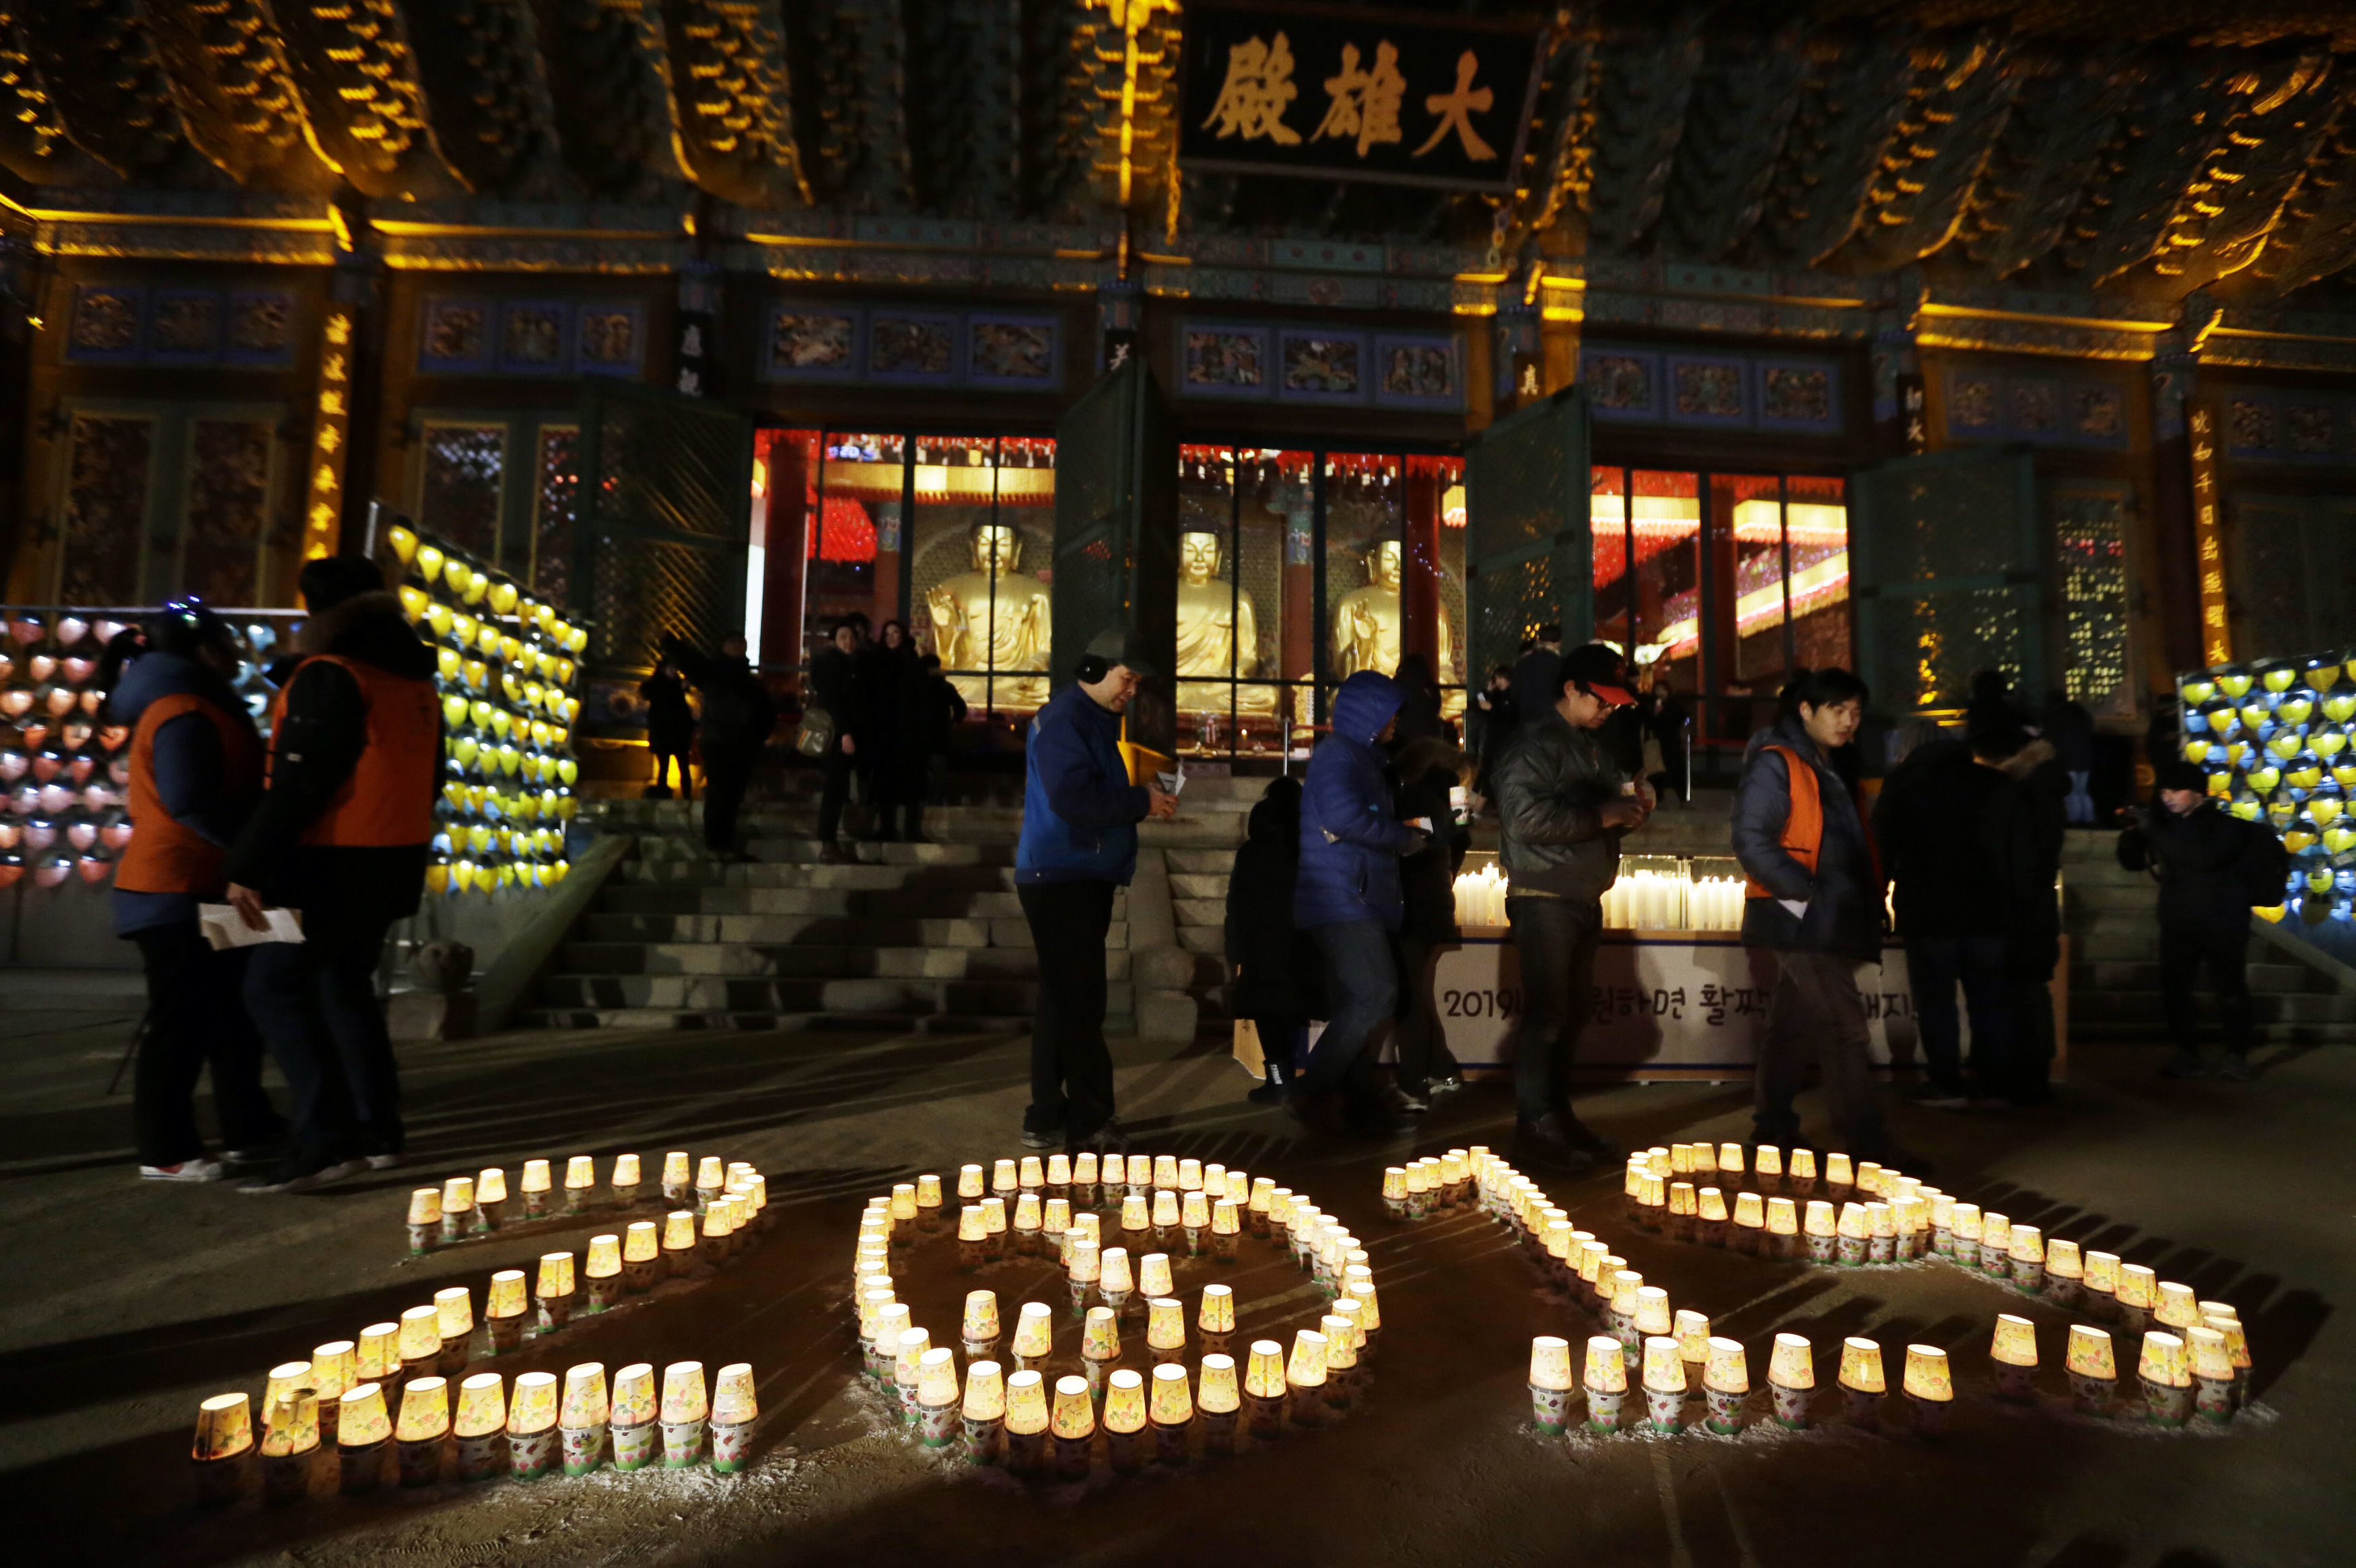 Buddhists light candles during New Year celebrations at Jogyesa Buddhist temple in Seoul